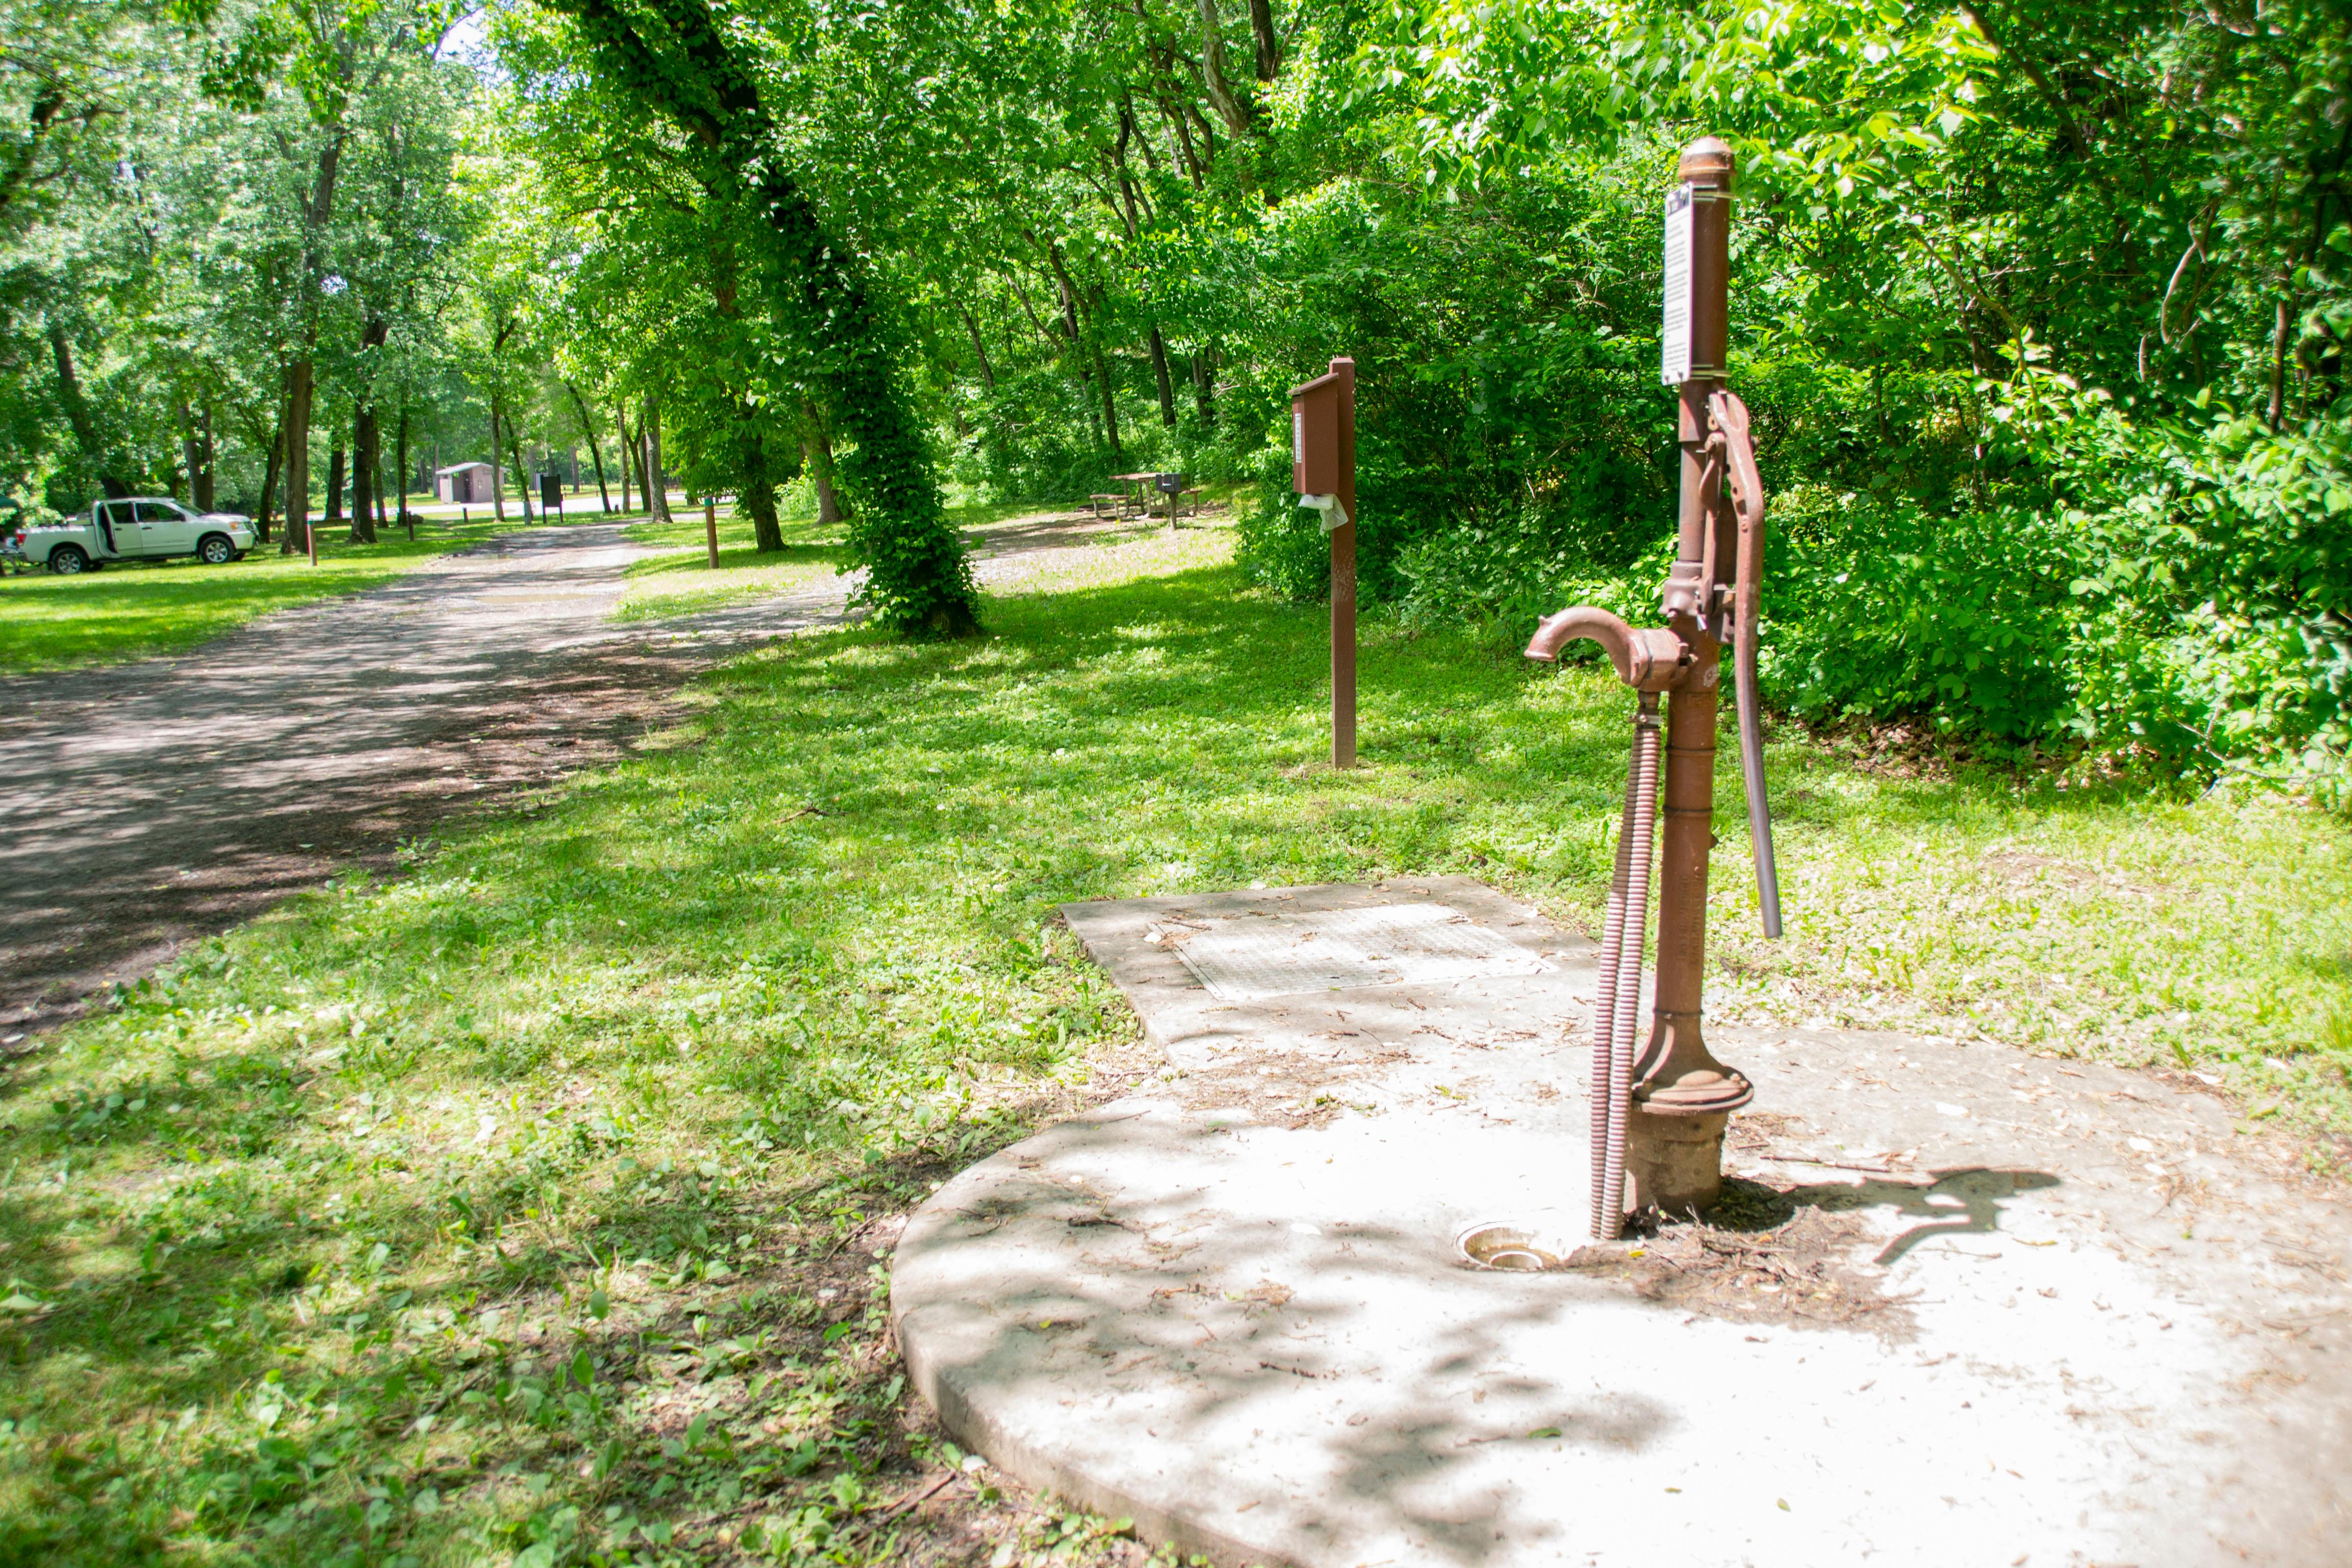 A water pump sits next to the towpath.